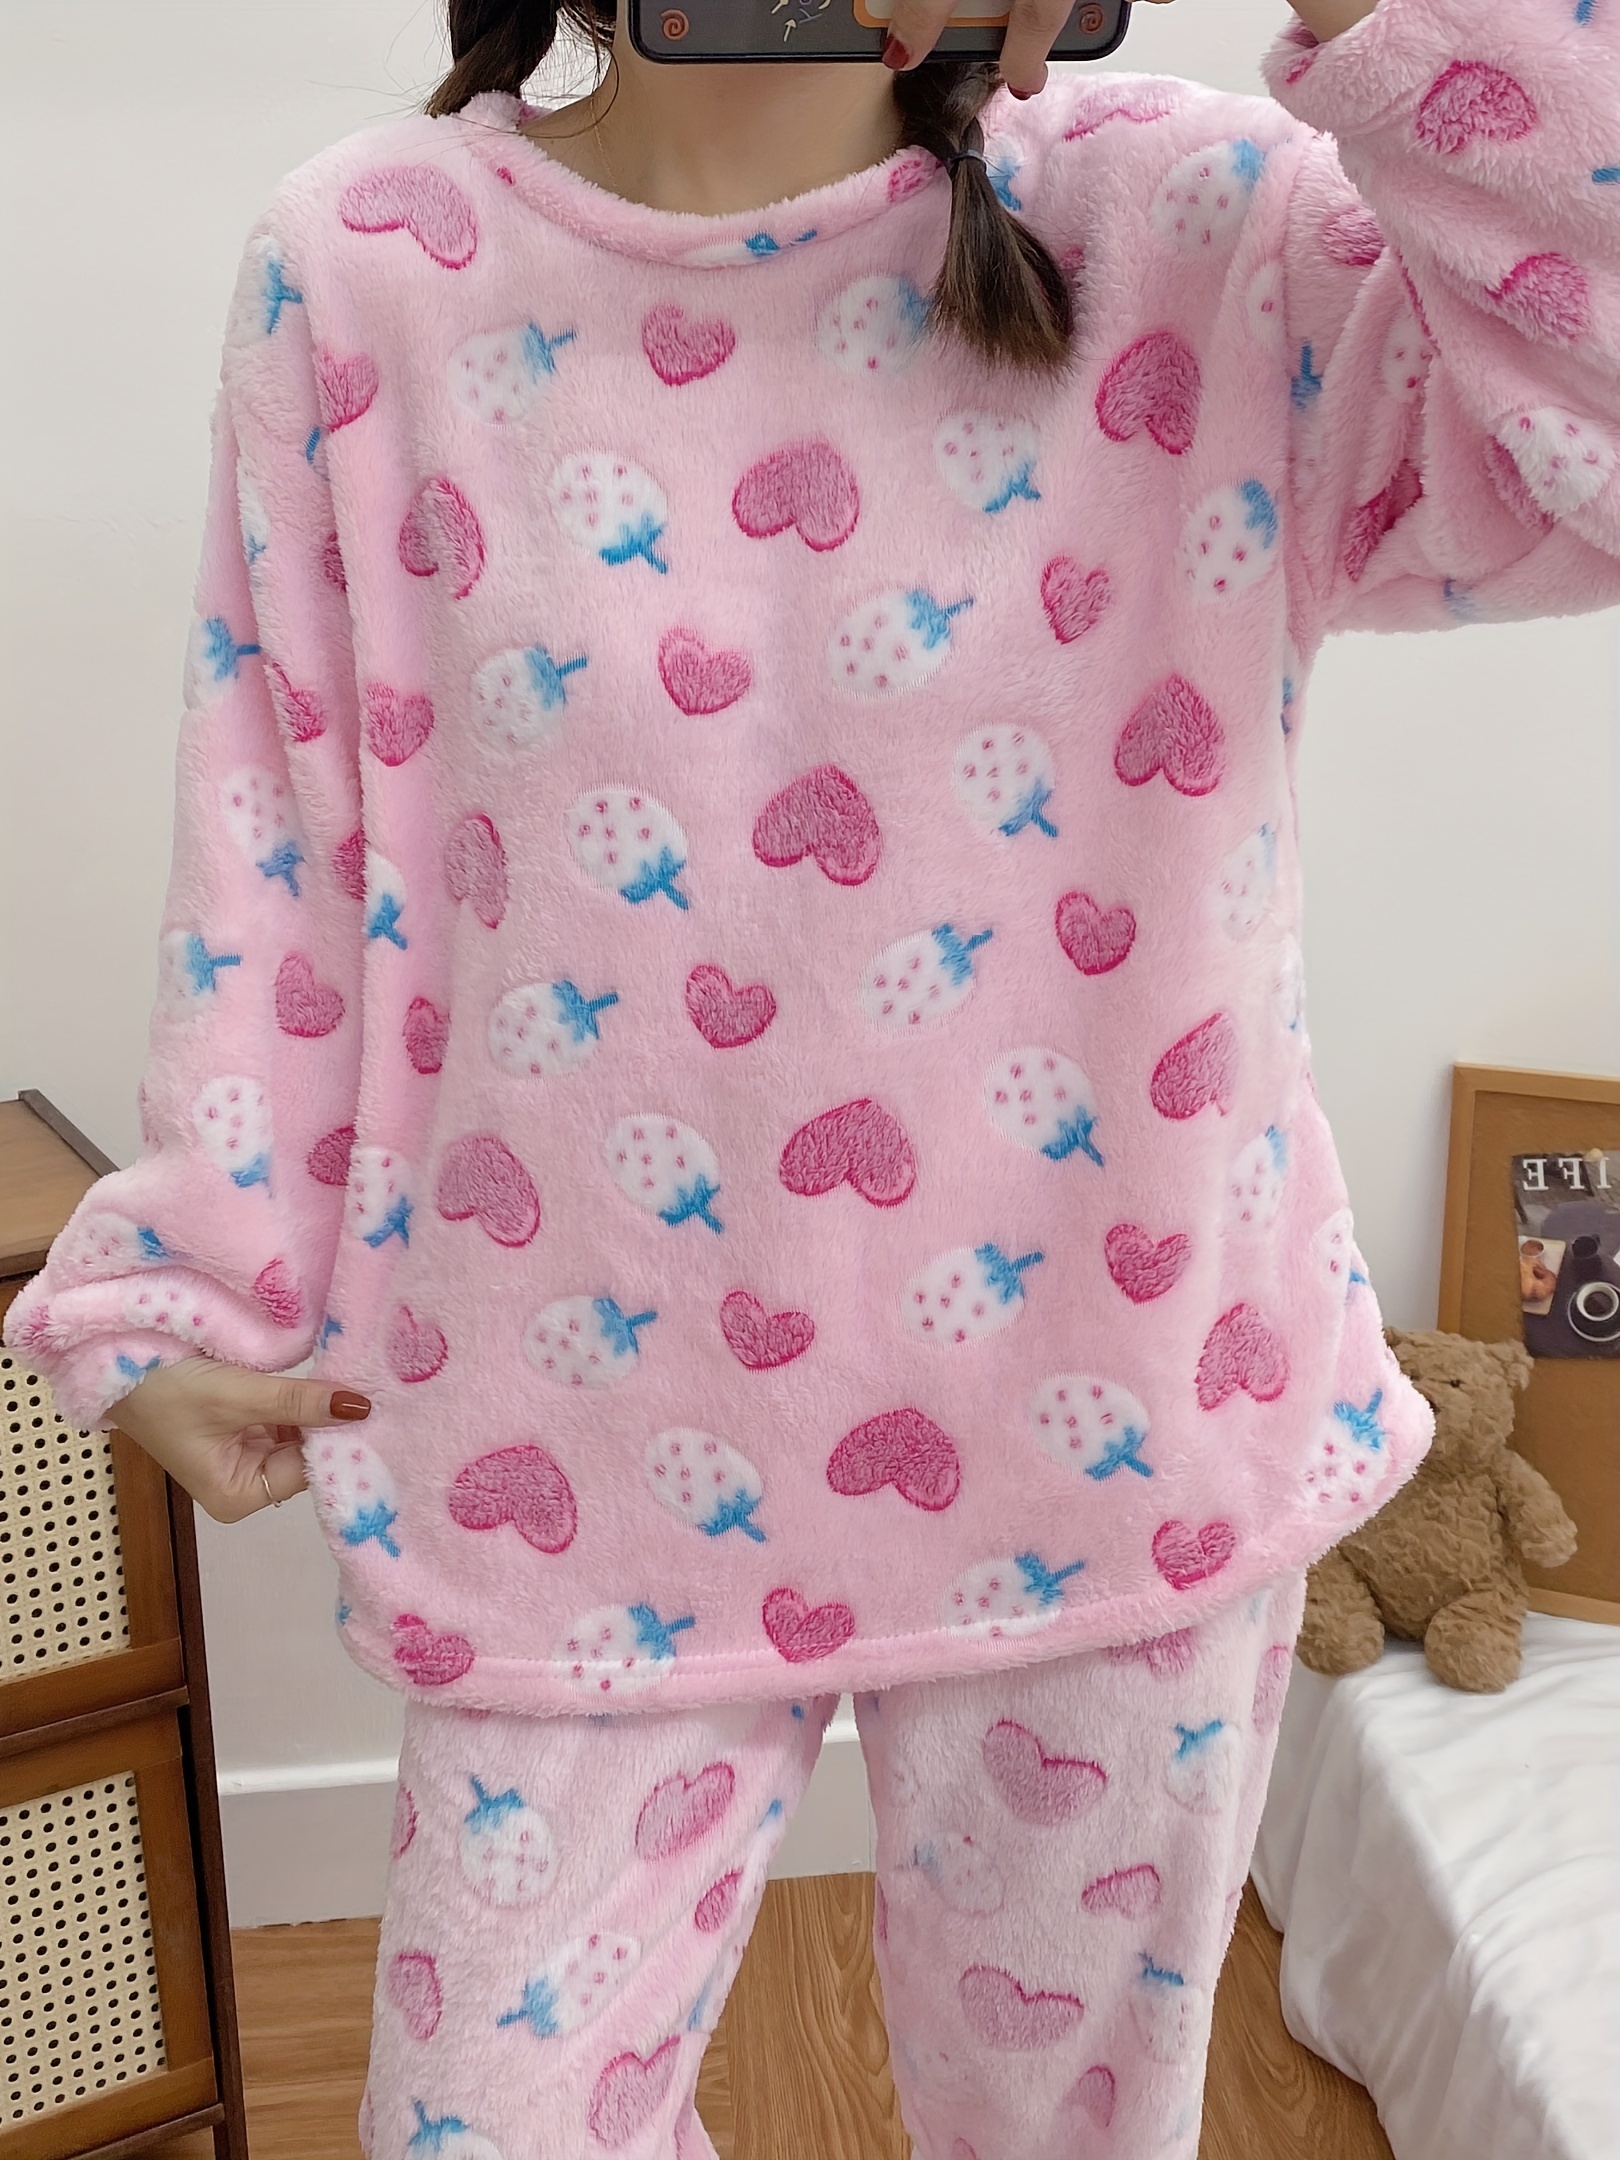 Winter Thermal Sleepwear Set For Women V Neck Coral Fleece, Flannel Pajamas,  And Home Clothing From Mang01, $10.33